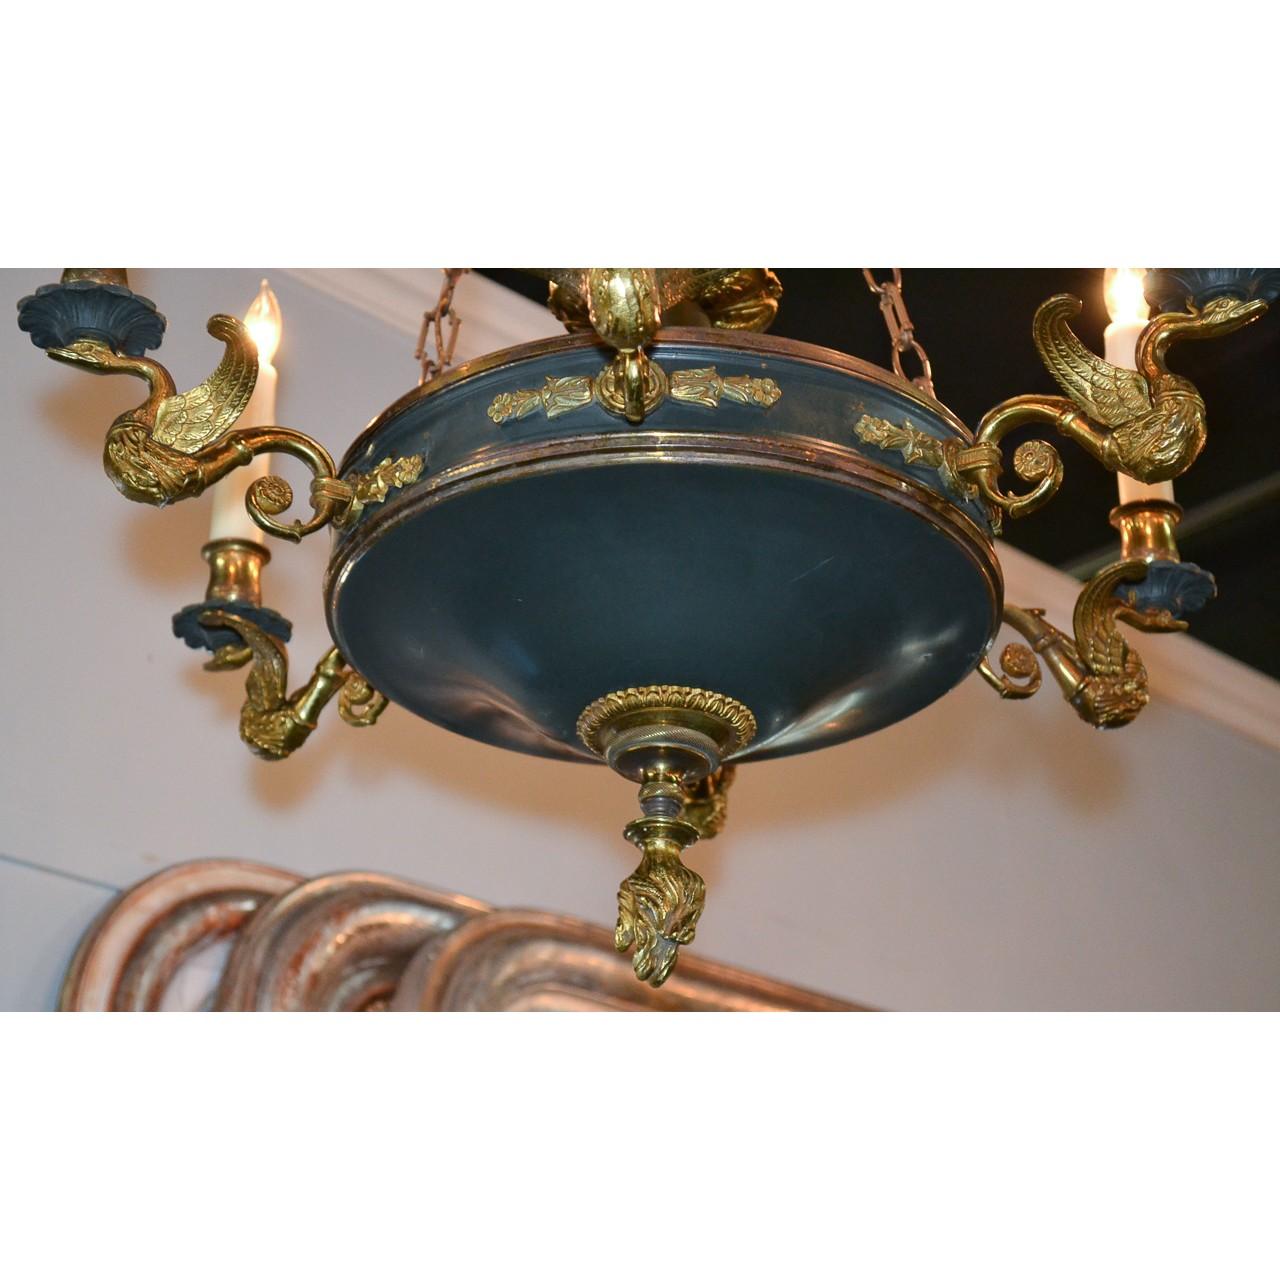 Uniquely designed 19th century French Empire style tole and gilt brass chandelier. The crown-shaped top with suspended chains holding a shaped mid-section with decorative acorn finial and mounted with six swan fashioned arms having scalloped bobeche